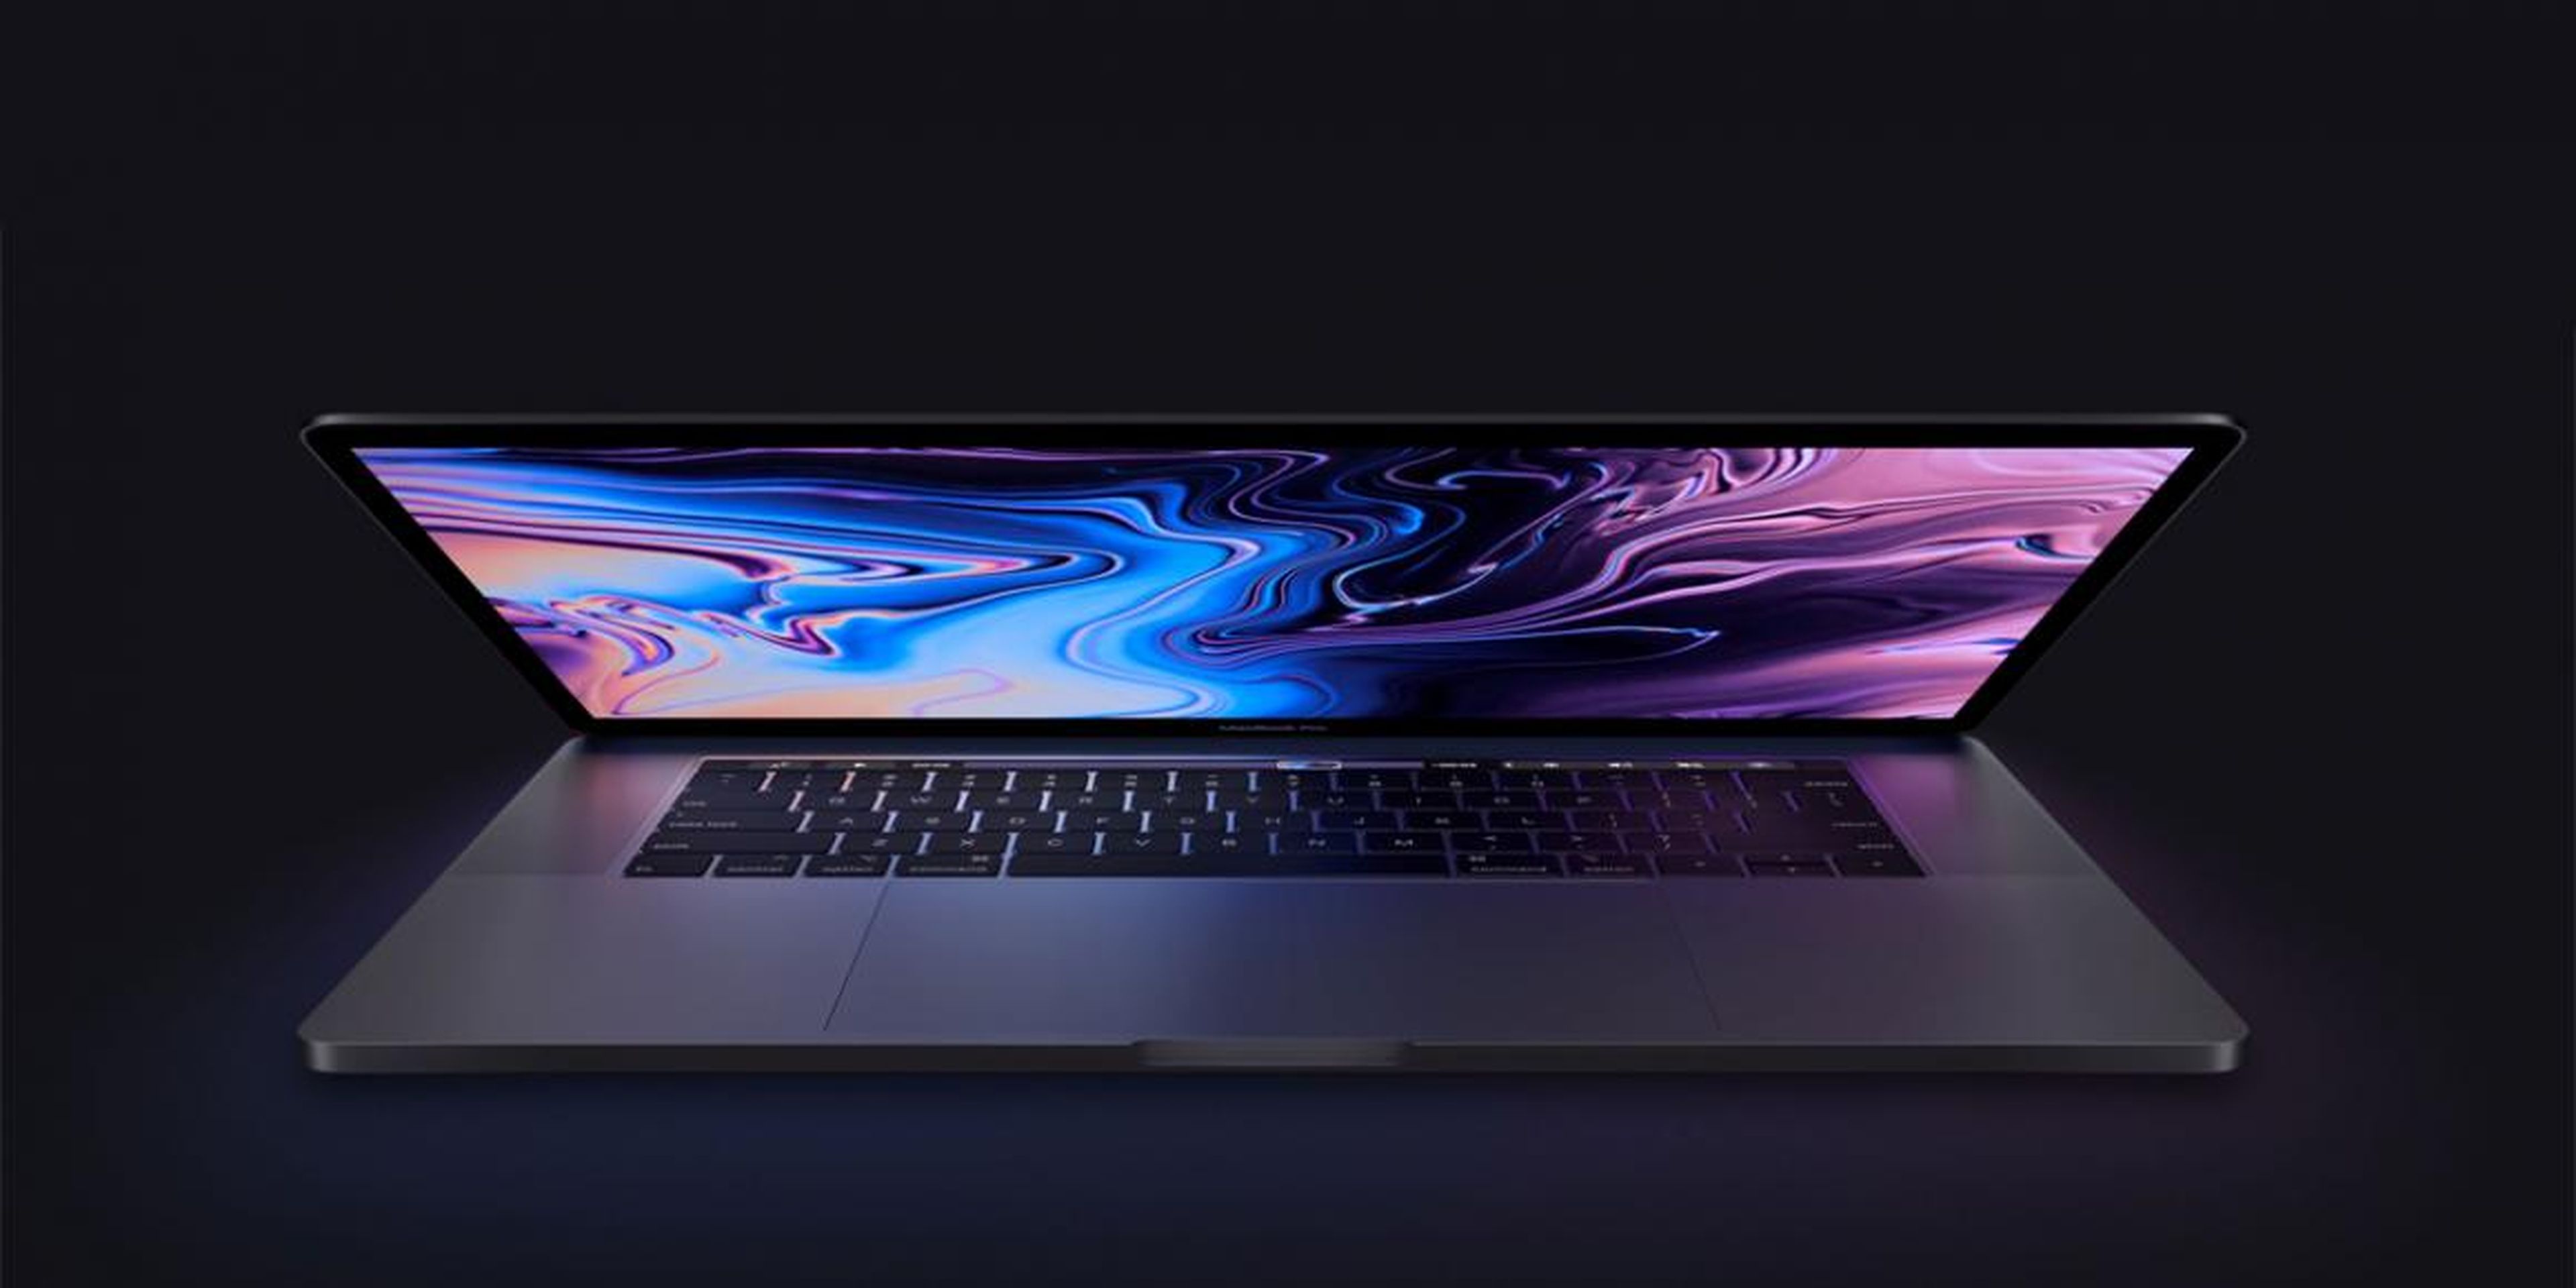 All of Apple's 15-inch MacBook Pros come with dedicated graphics chips, even if you don't want them. And you pay for them.